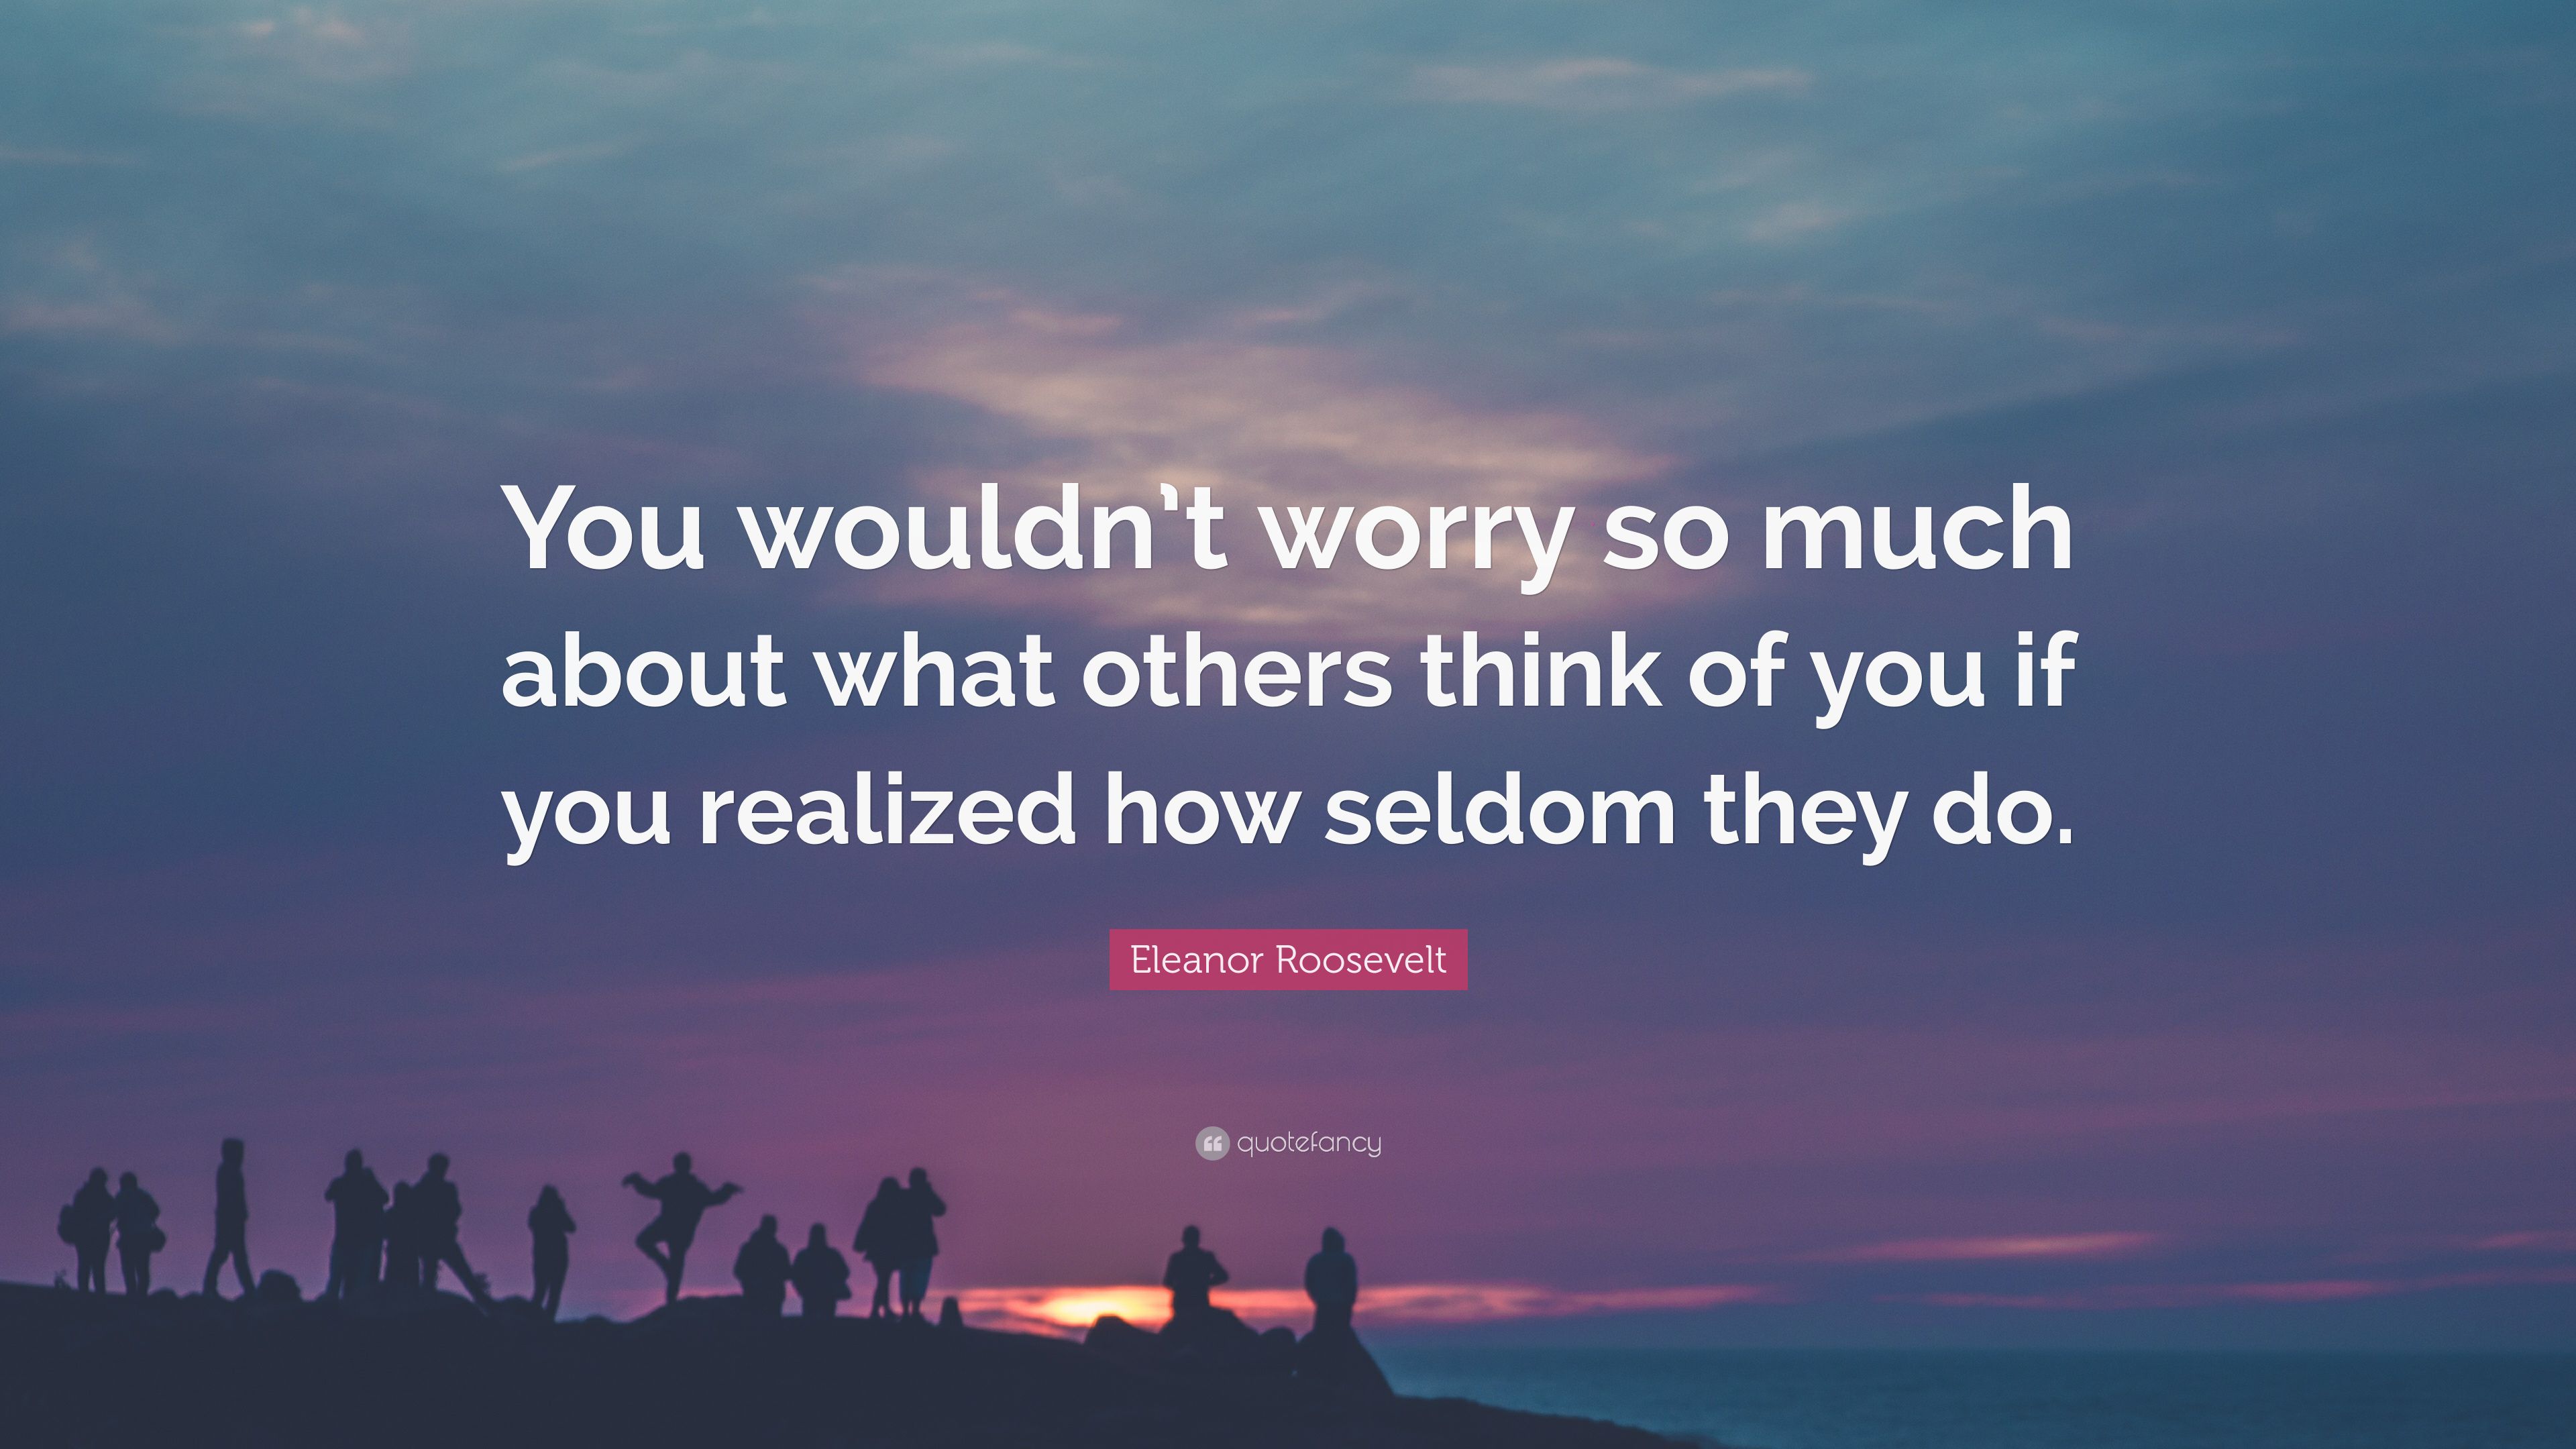 Eleanor Roosevelt Quote: “You wouldn't worry so much about what others think of you if